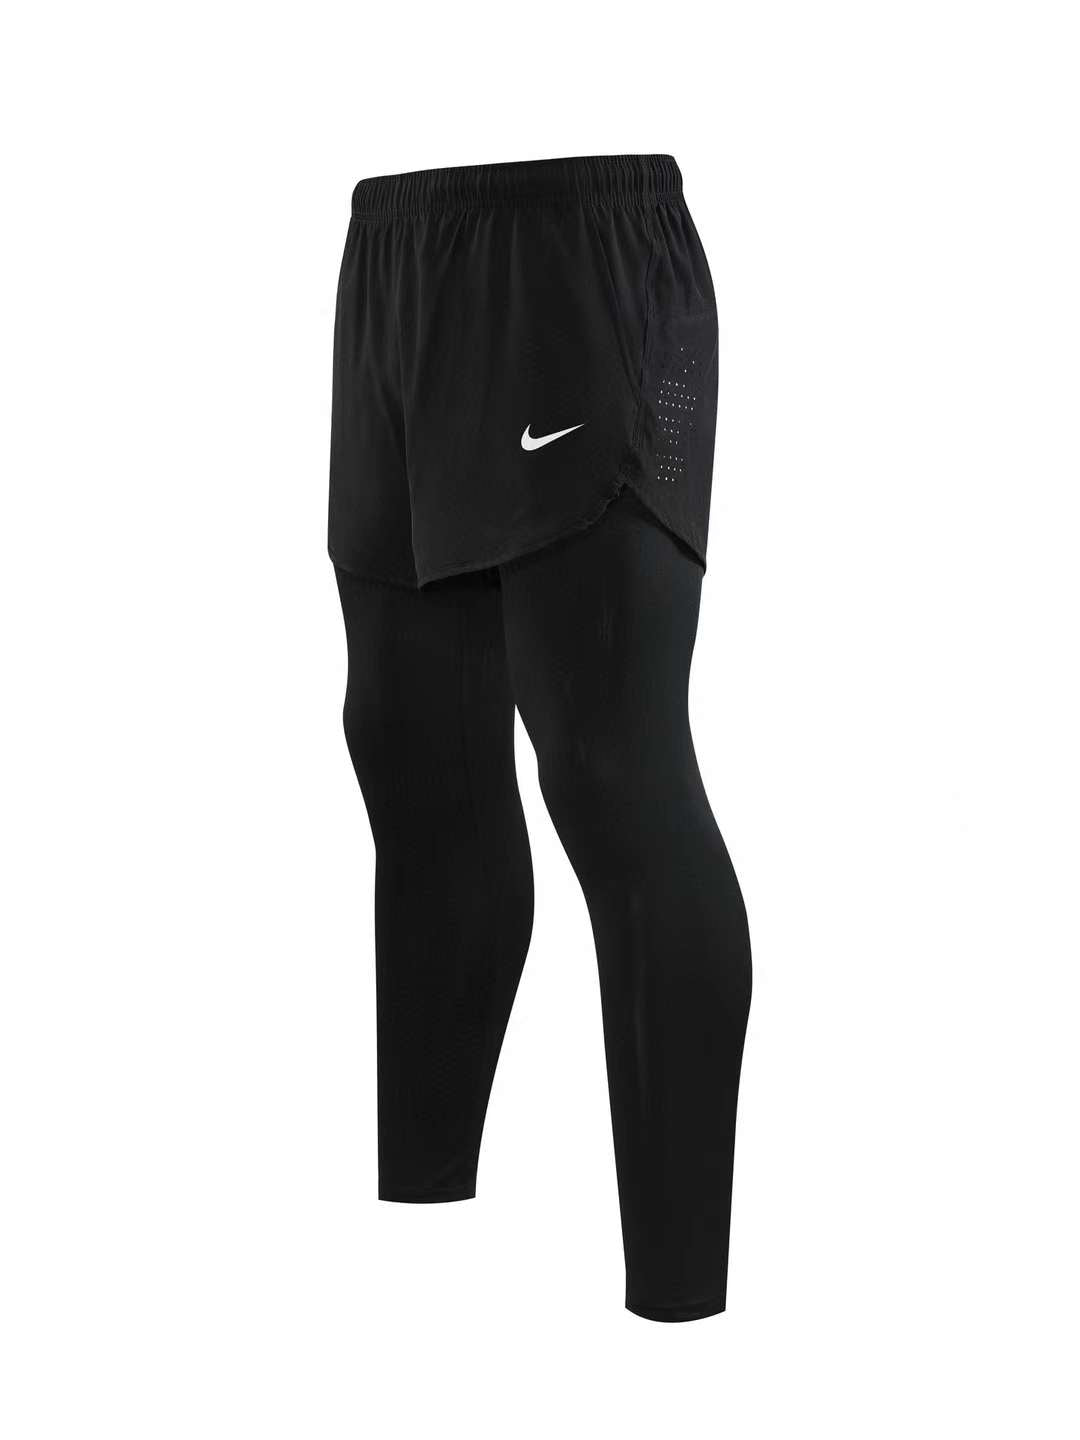 NIKE SHORTS WITH INBUILT LONG TIGHTS.